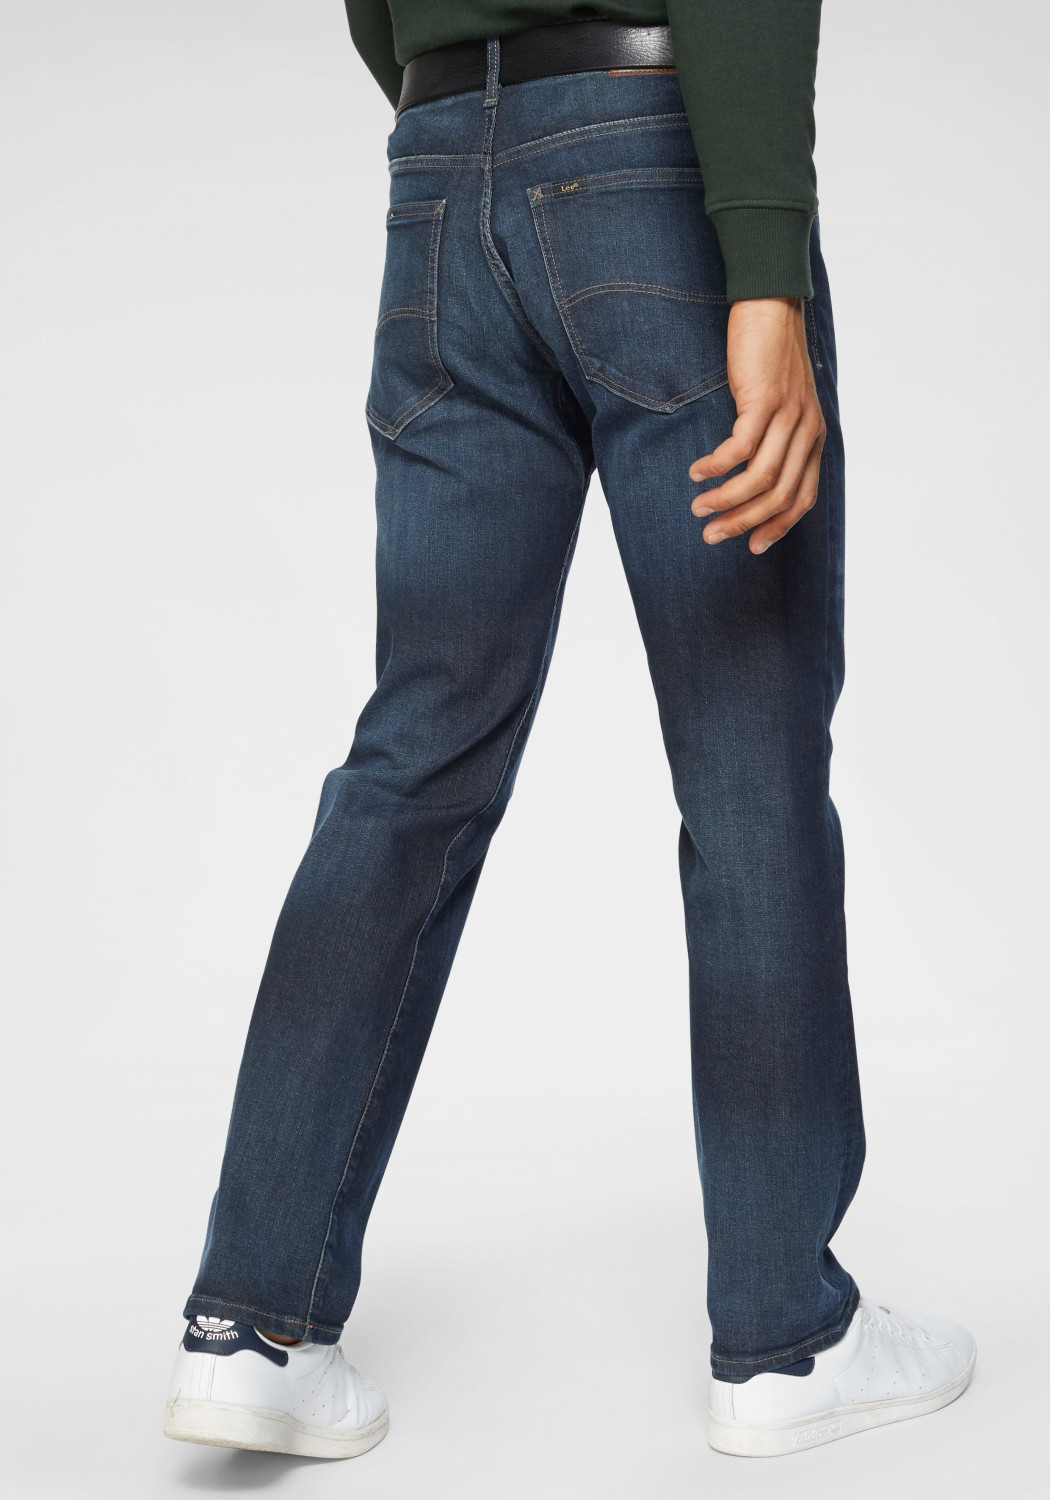 Buy Lee Extreme Motion Straight Jeans trip from £34.49 (Today) – Best ...